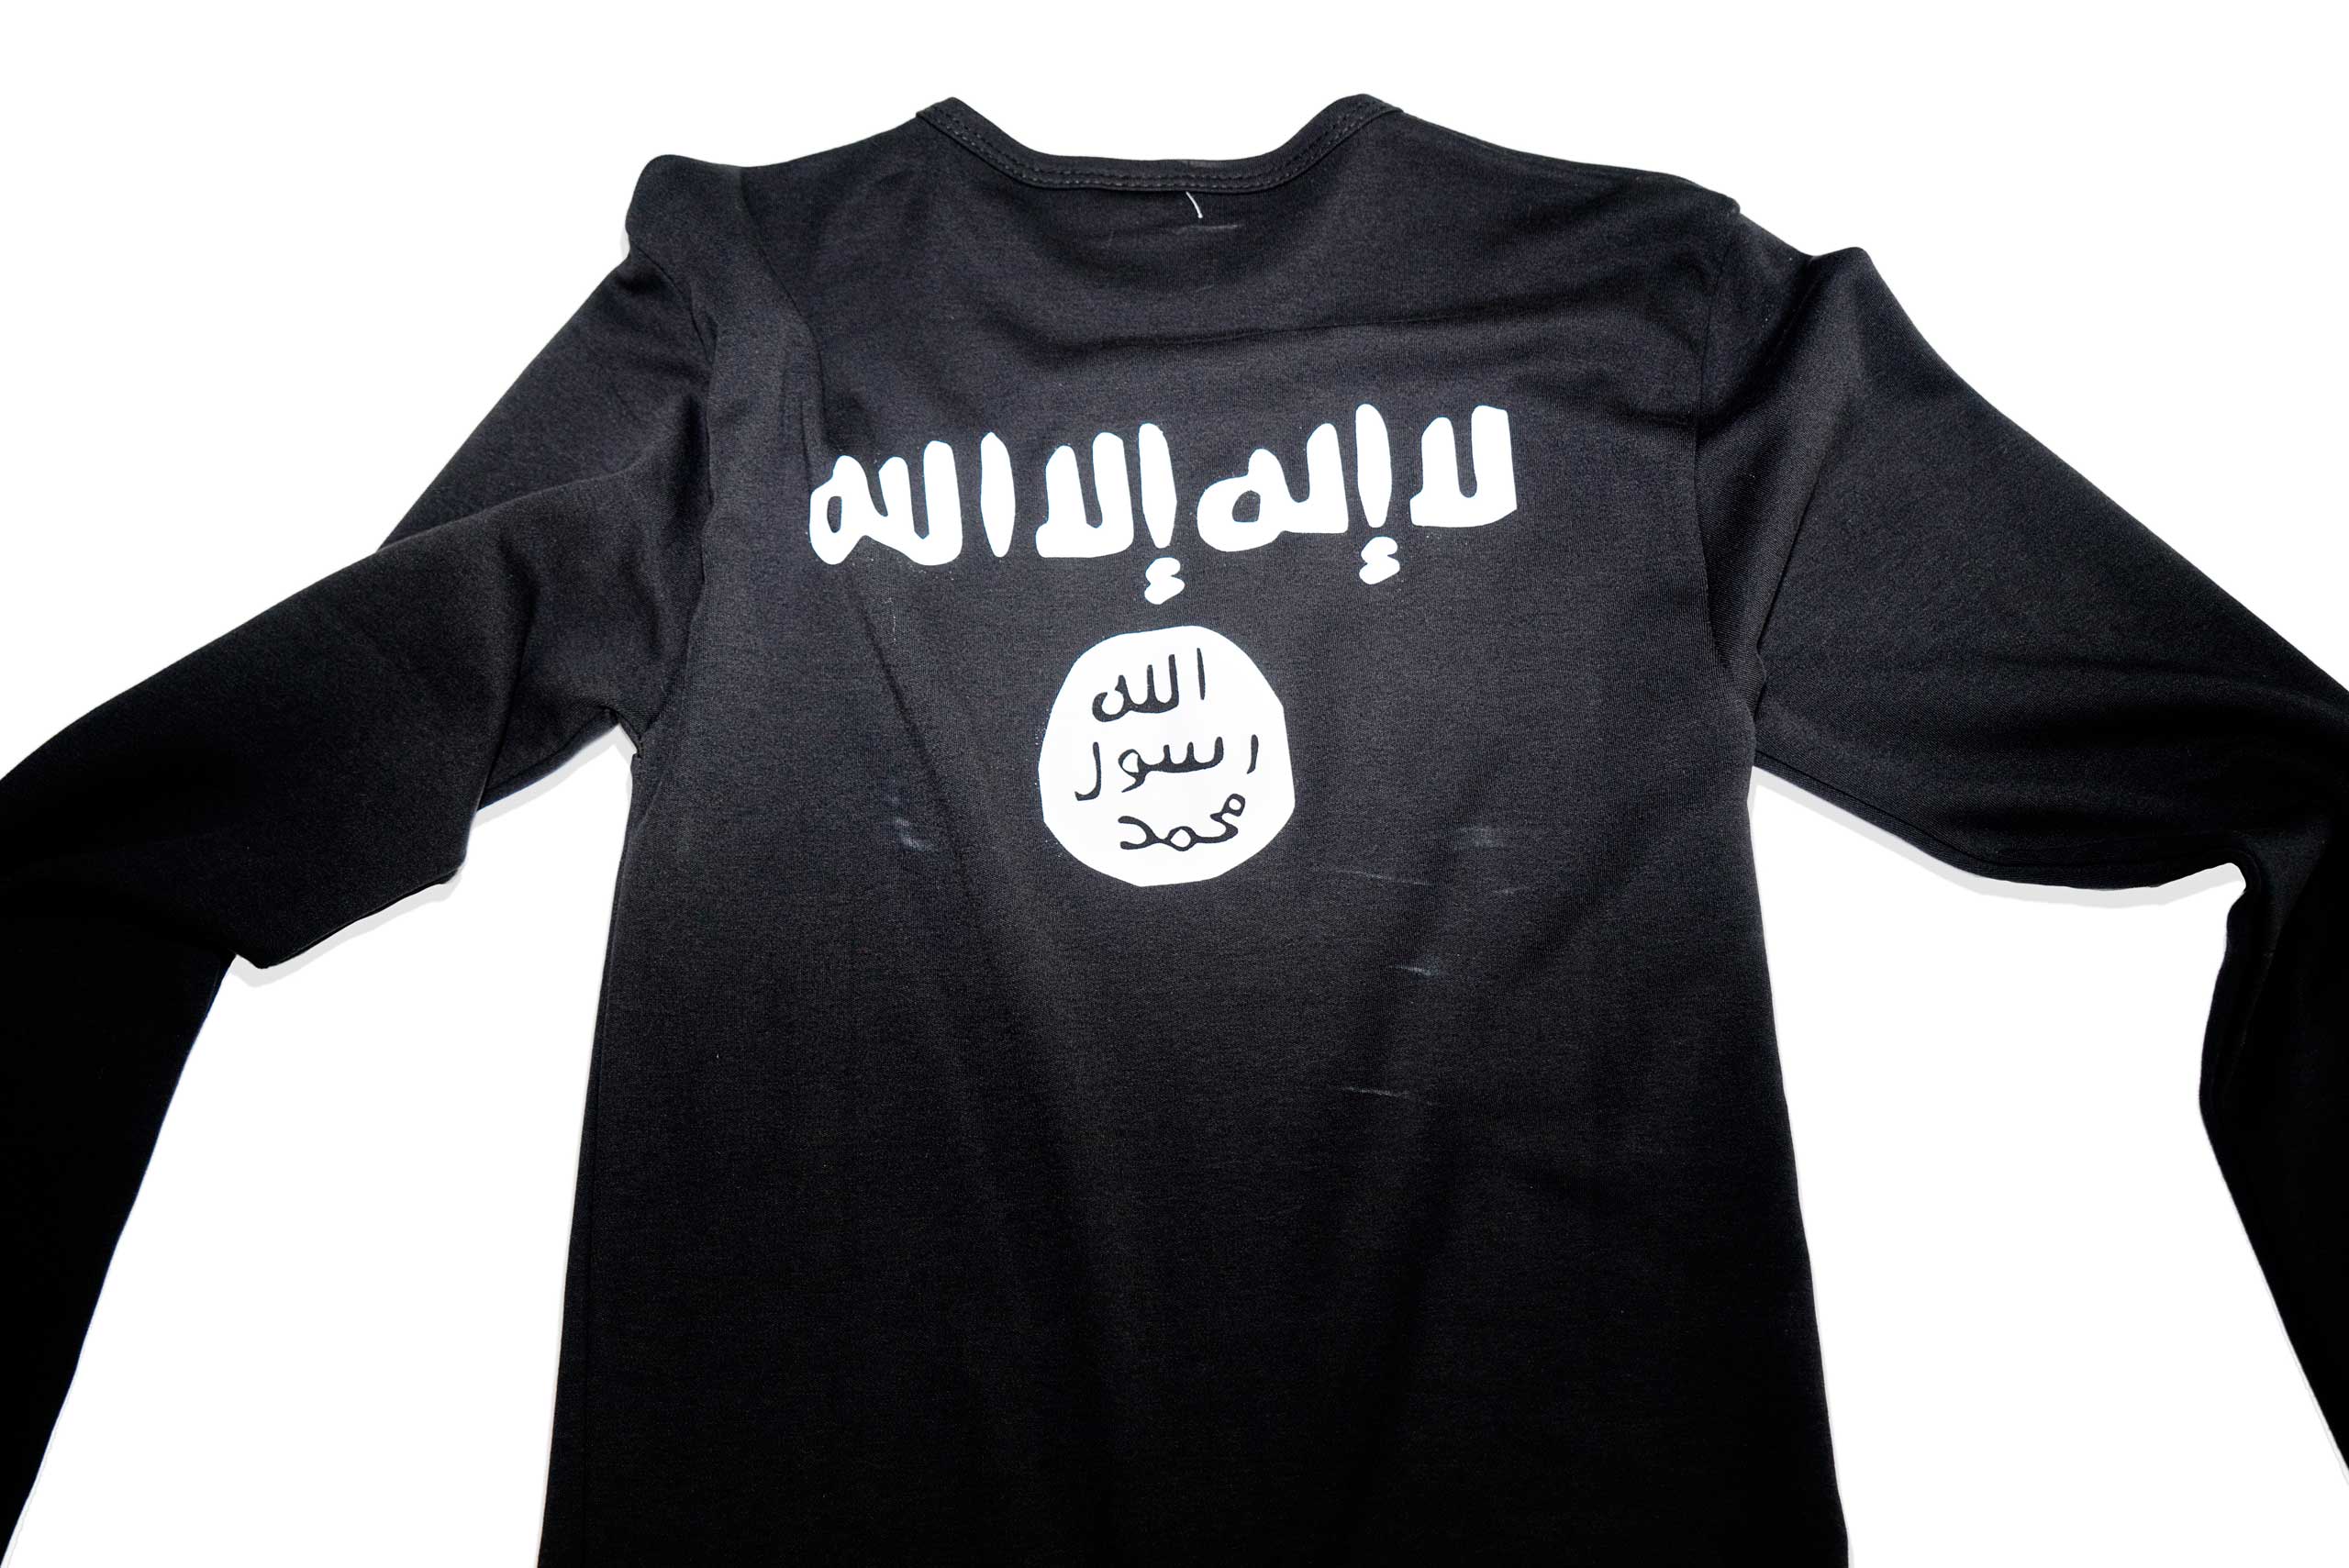 A long sleeve T-shirt with the iconography of Islamic State, found in a Islamic clothing and accessory shop in the Bagcilar district of Istanbul, Turkey.